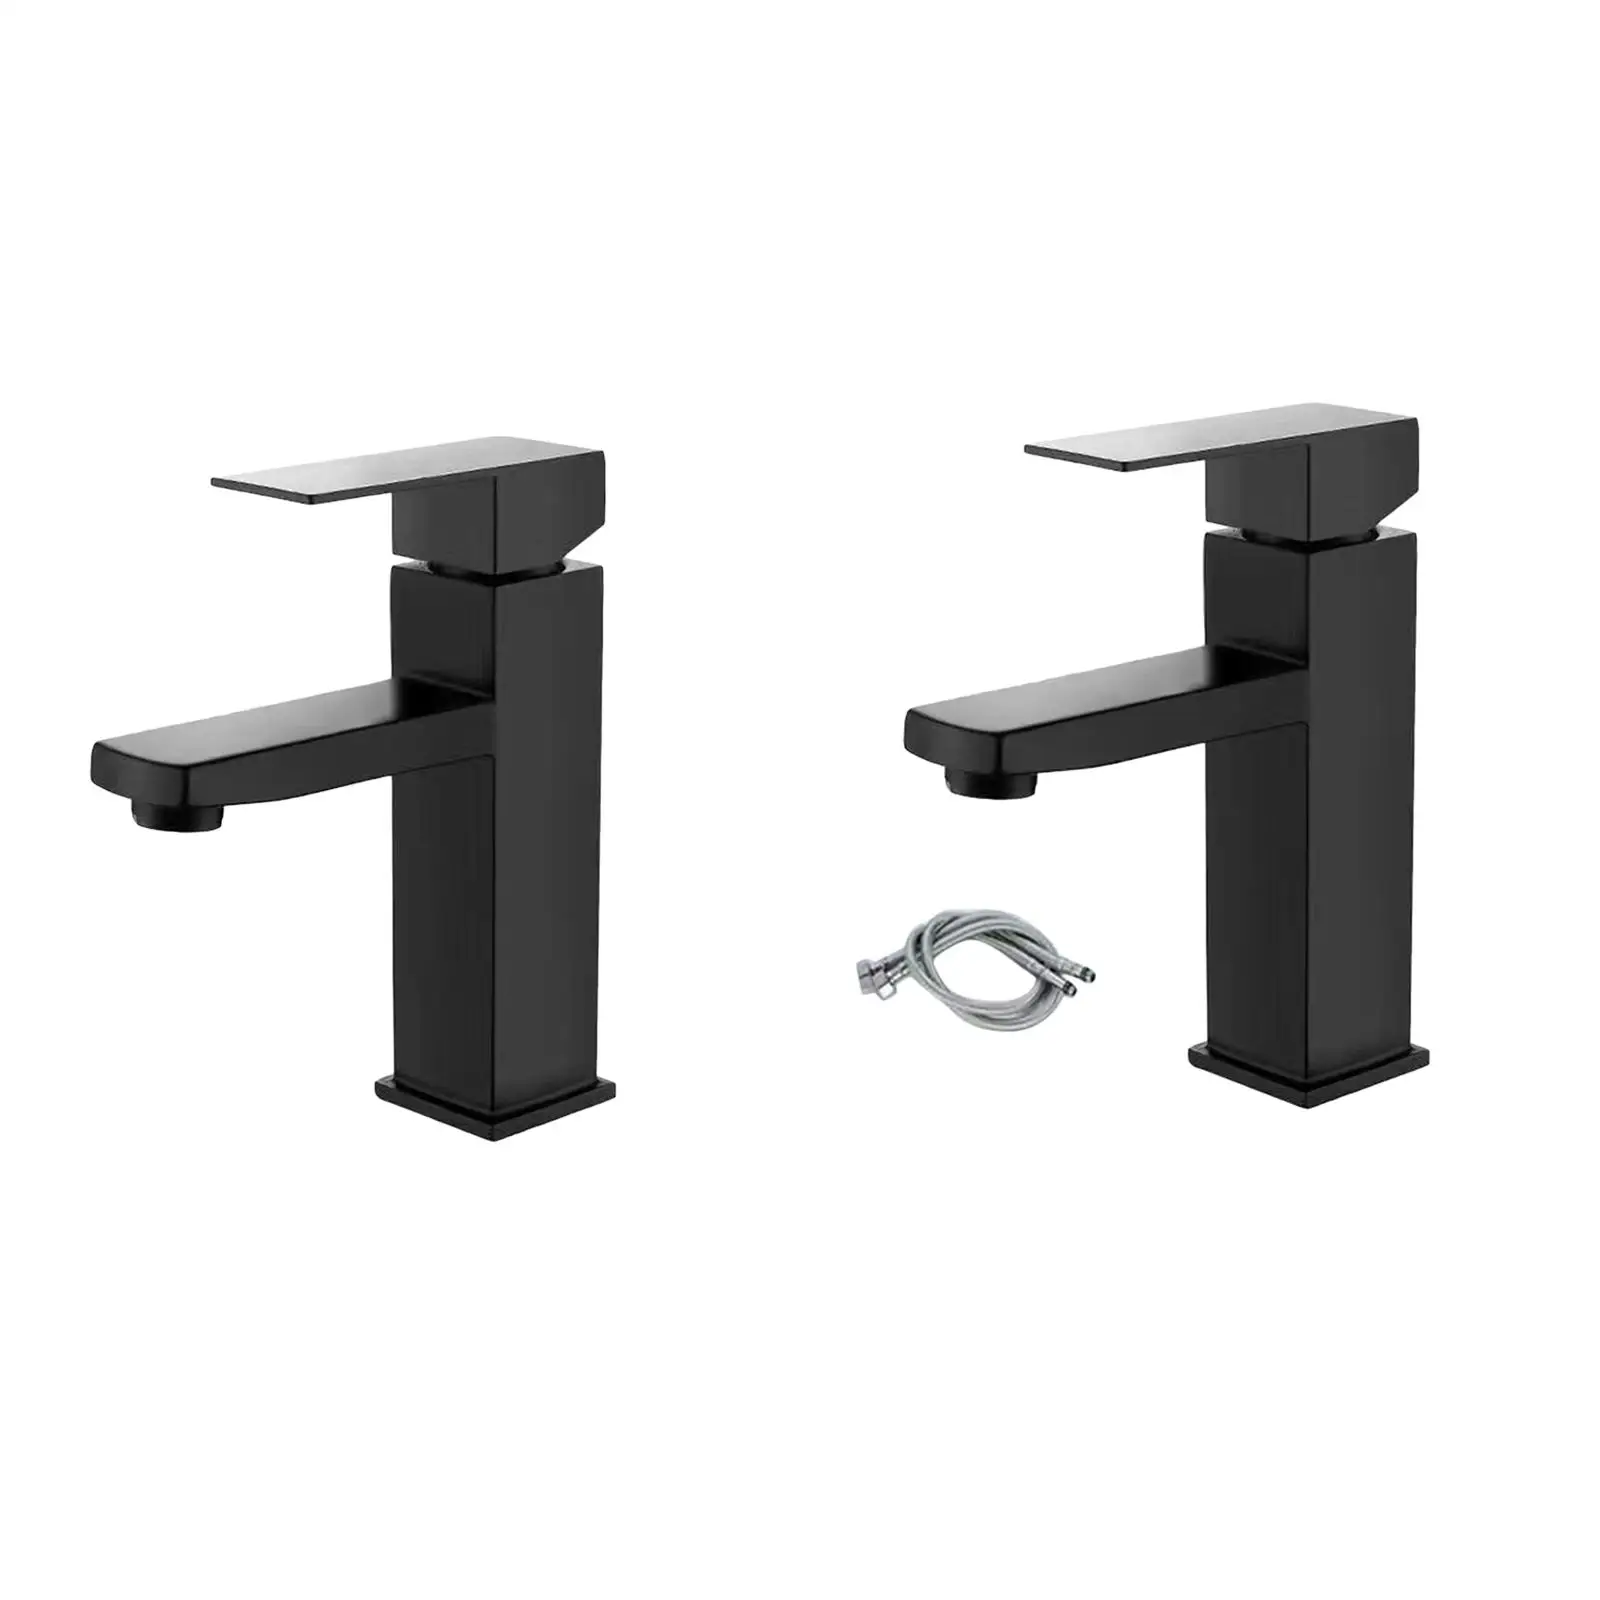 Bathroom Sink Faucet Rustproof Black Basin Faucet Durable Stainless Steel Hot and Cold Water for Sink Wash Basin Hotel